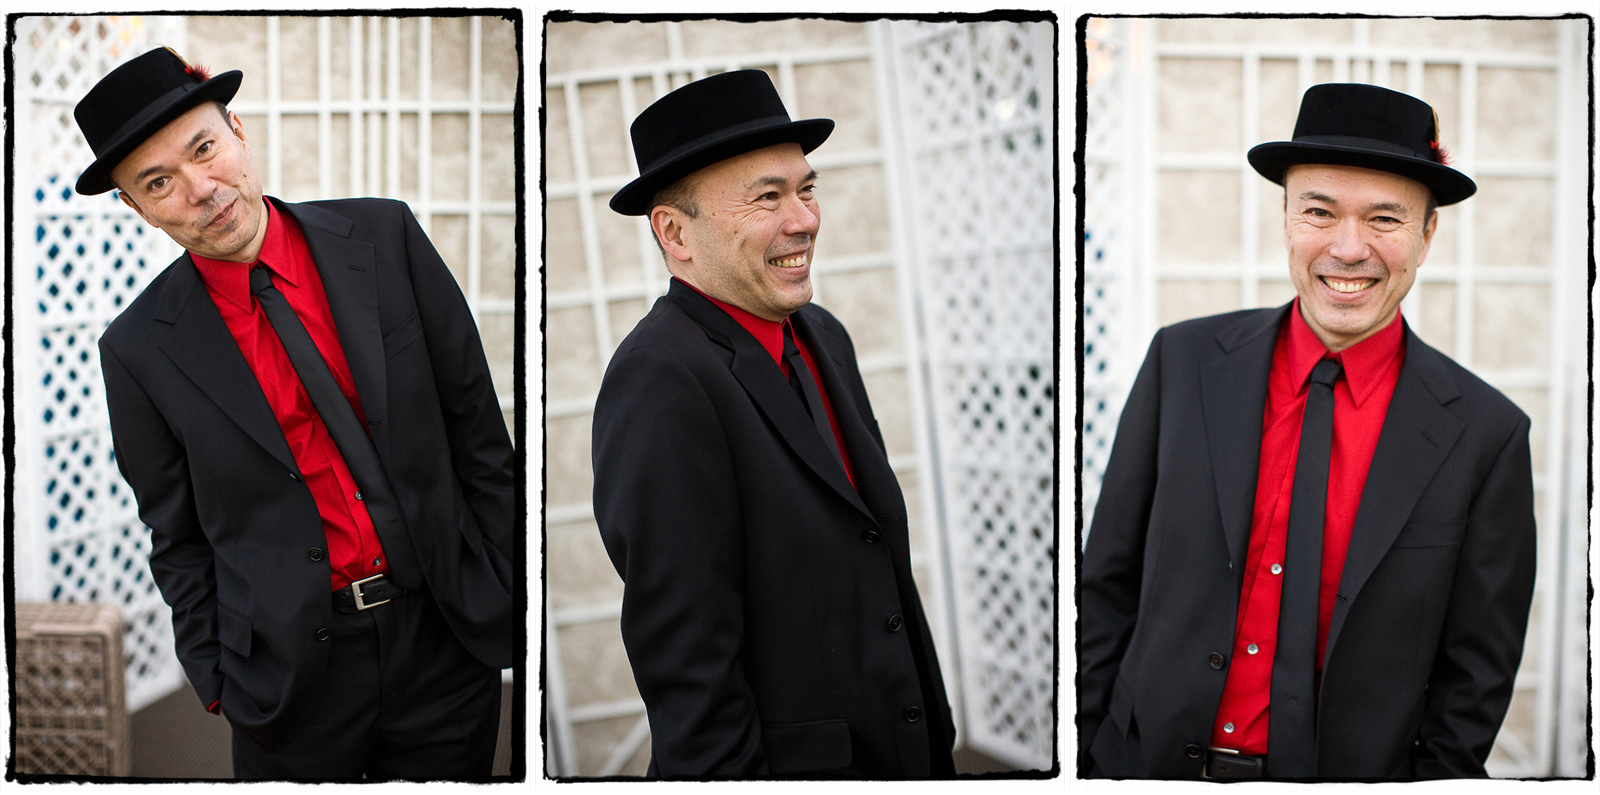 No shortage of groom style at this wedding at The Palm House at Brooklyn Botanic Garden in Brooklyn.